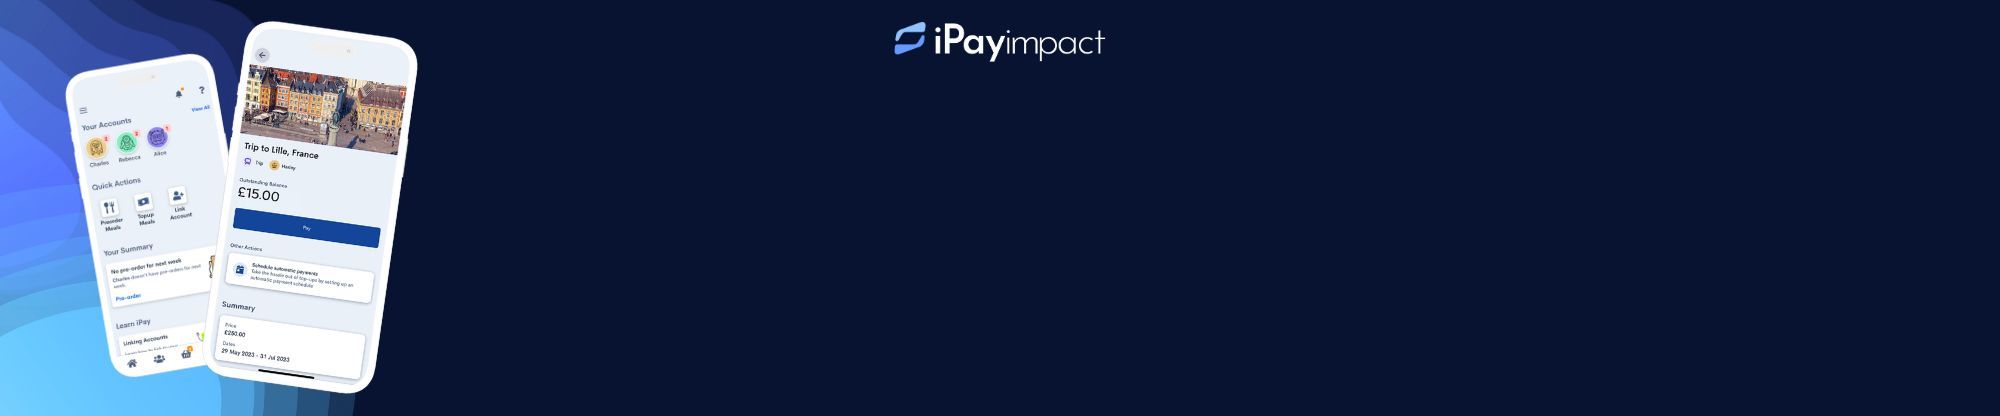 UPDATED iPay Register interest web banner